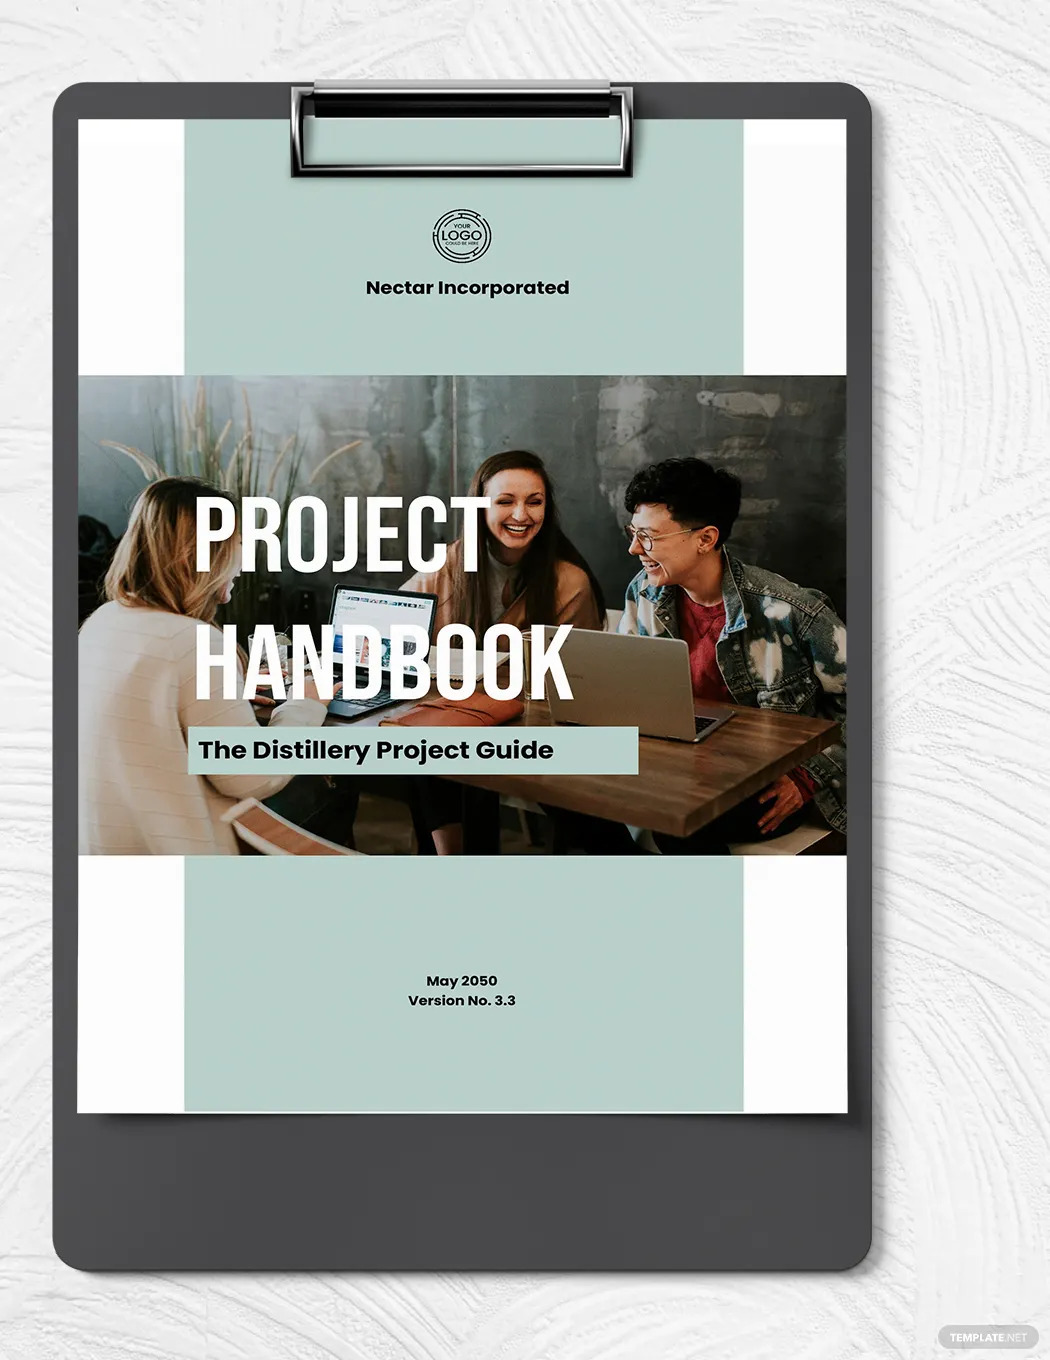 research project guide a handbook for teachers and students